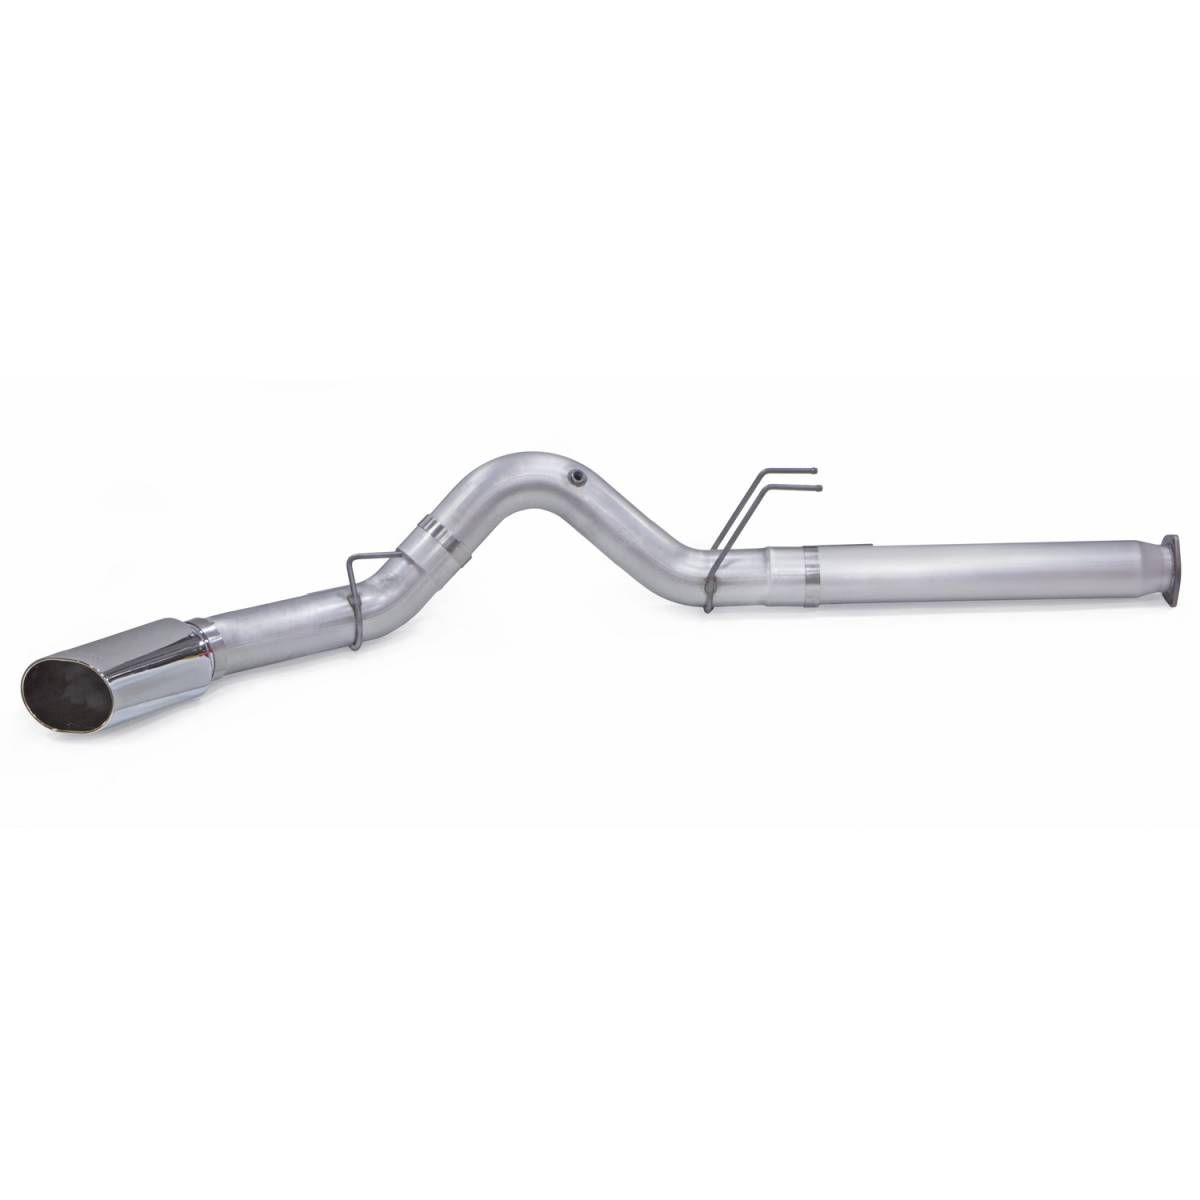 Banks Power - Banks Power Monster Exhaust System 5-inch Single Exit Chrome Tip 2017-Present Ford F250/F350/F450 6.7L